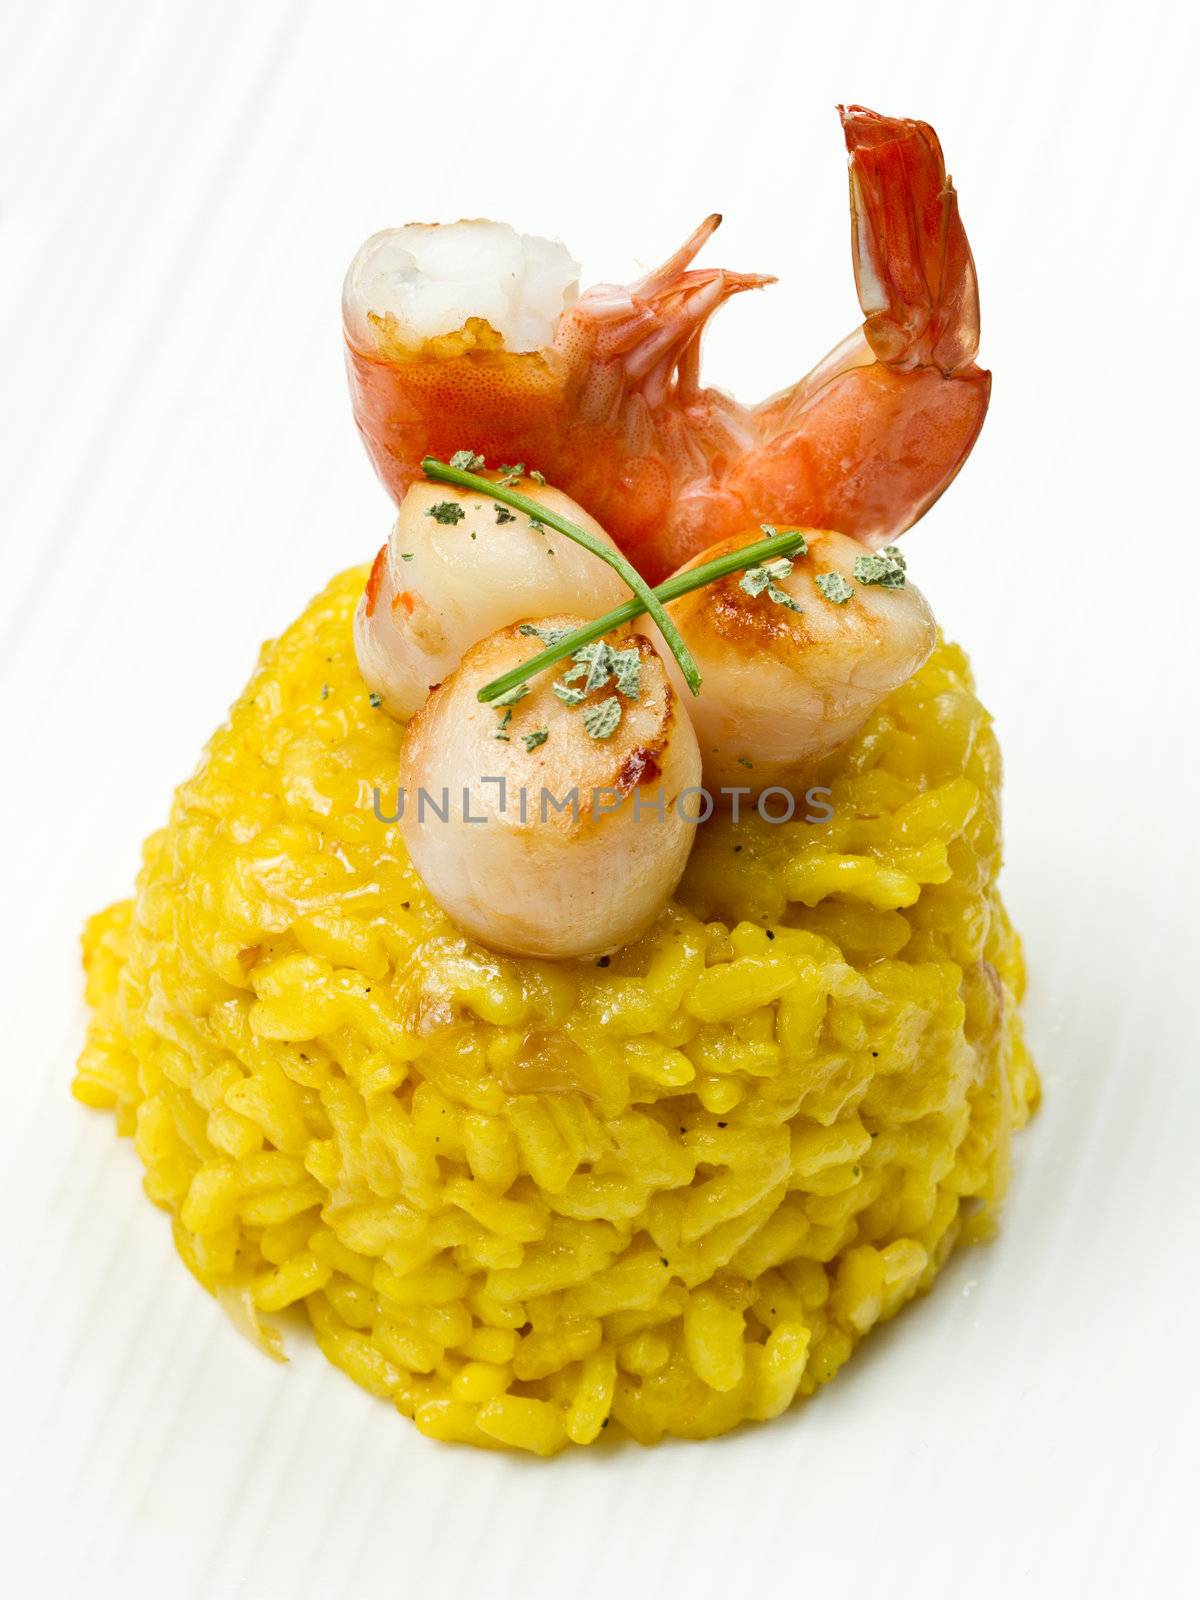 saffron risotto with grilled scallops and shrimp by lsantilli